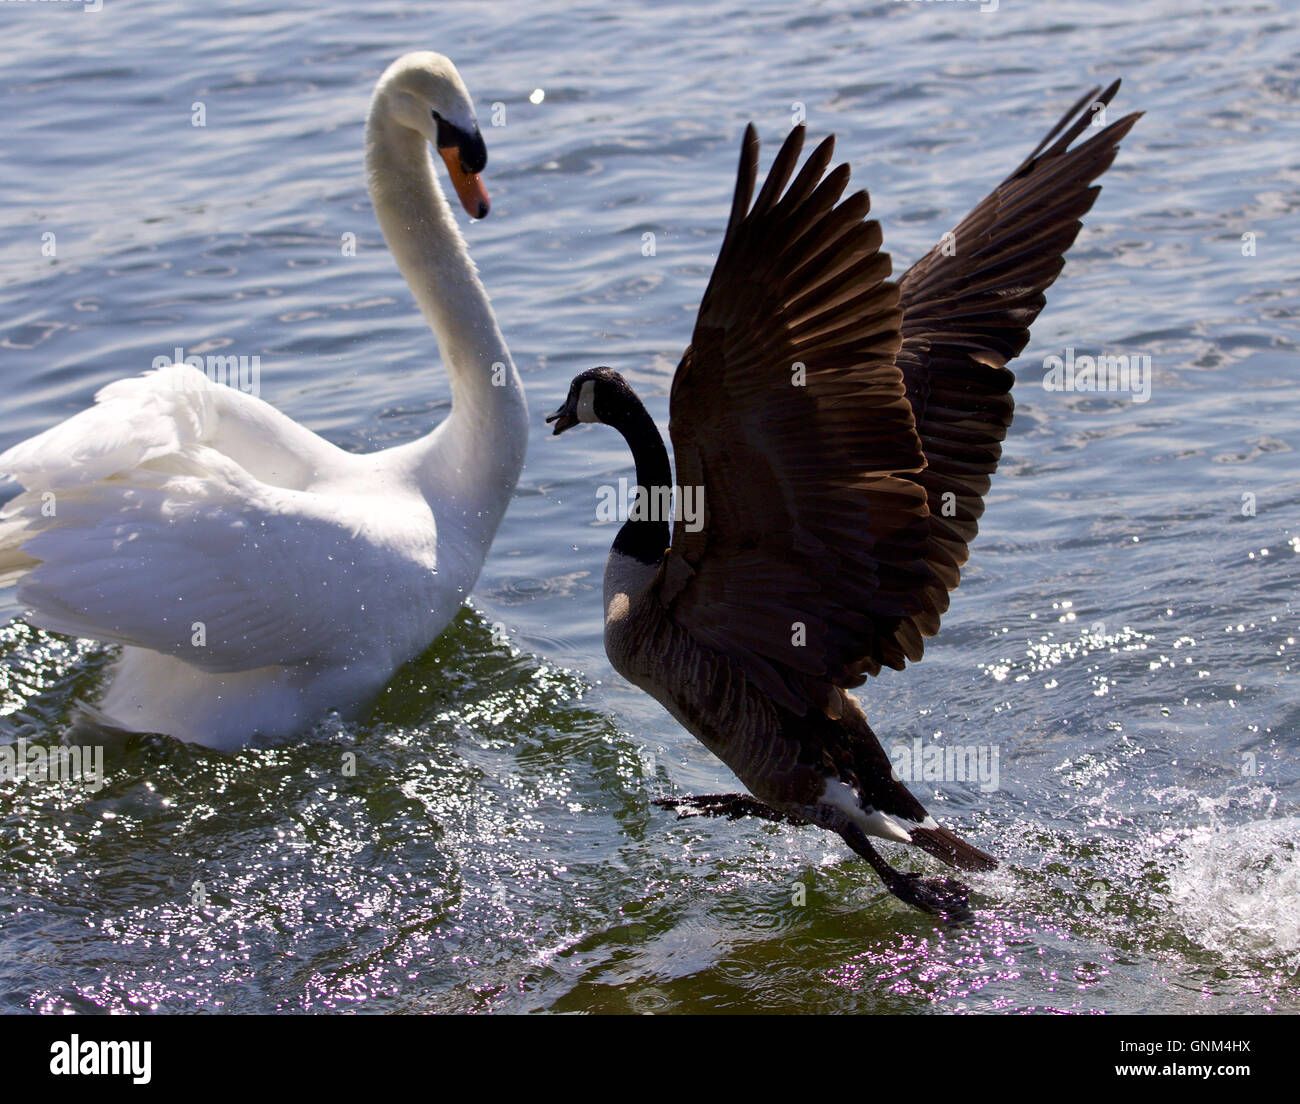 Amazing image of the epic fight between a Canada goose and a swan on the lake Stock Photo